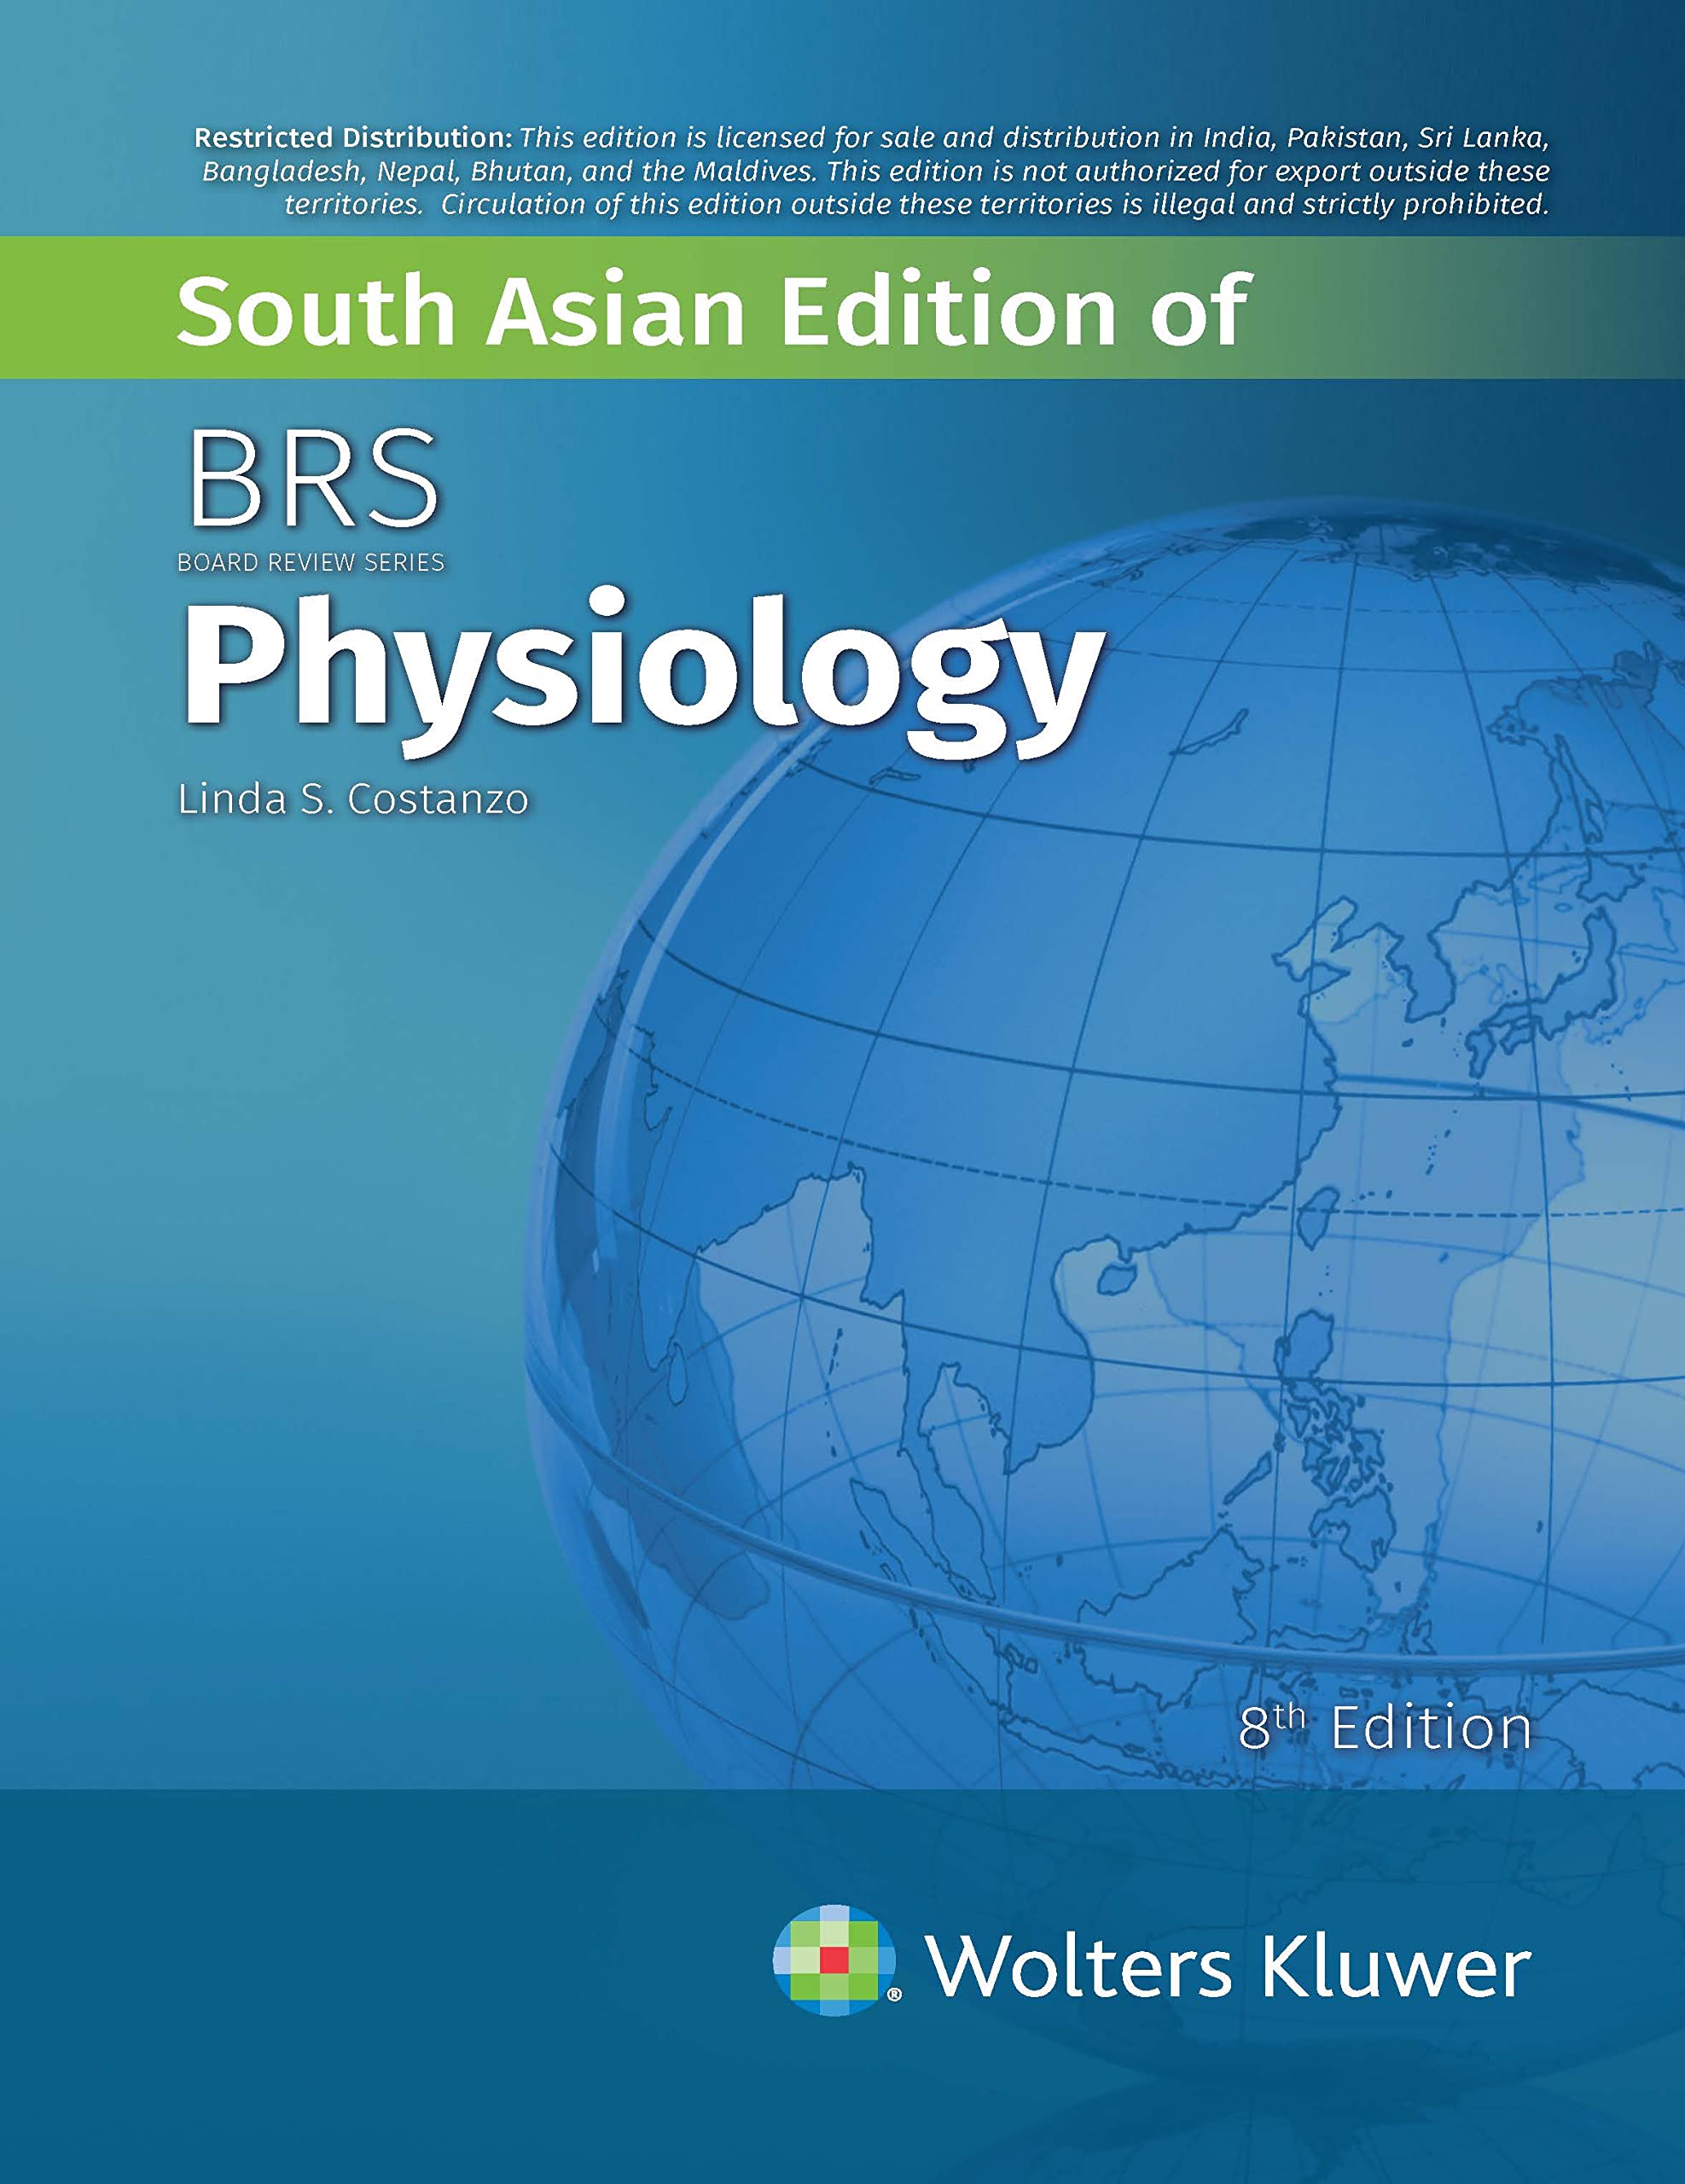 BRS Physiology  8th edition